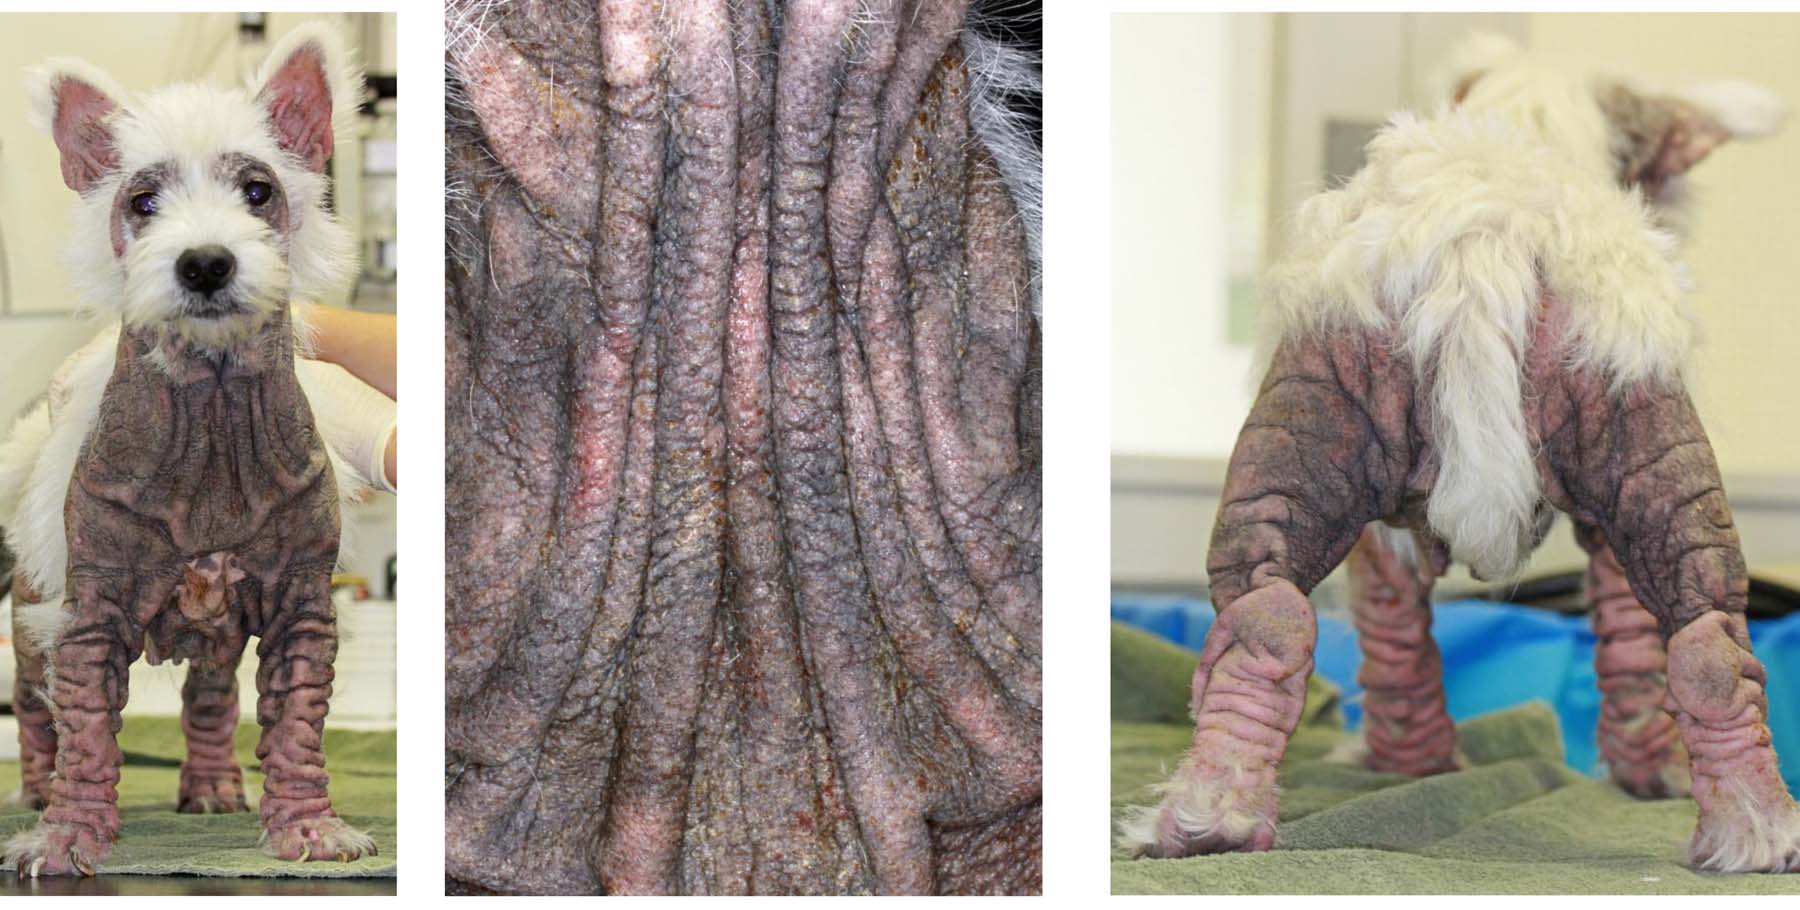 The Spectre of Severe Chronic Atopic Dermatitis with Staphylococcal Bacterial Dysbiosis, West Highland White Terrier